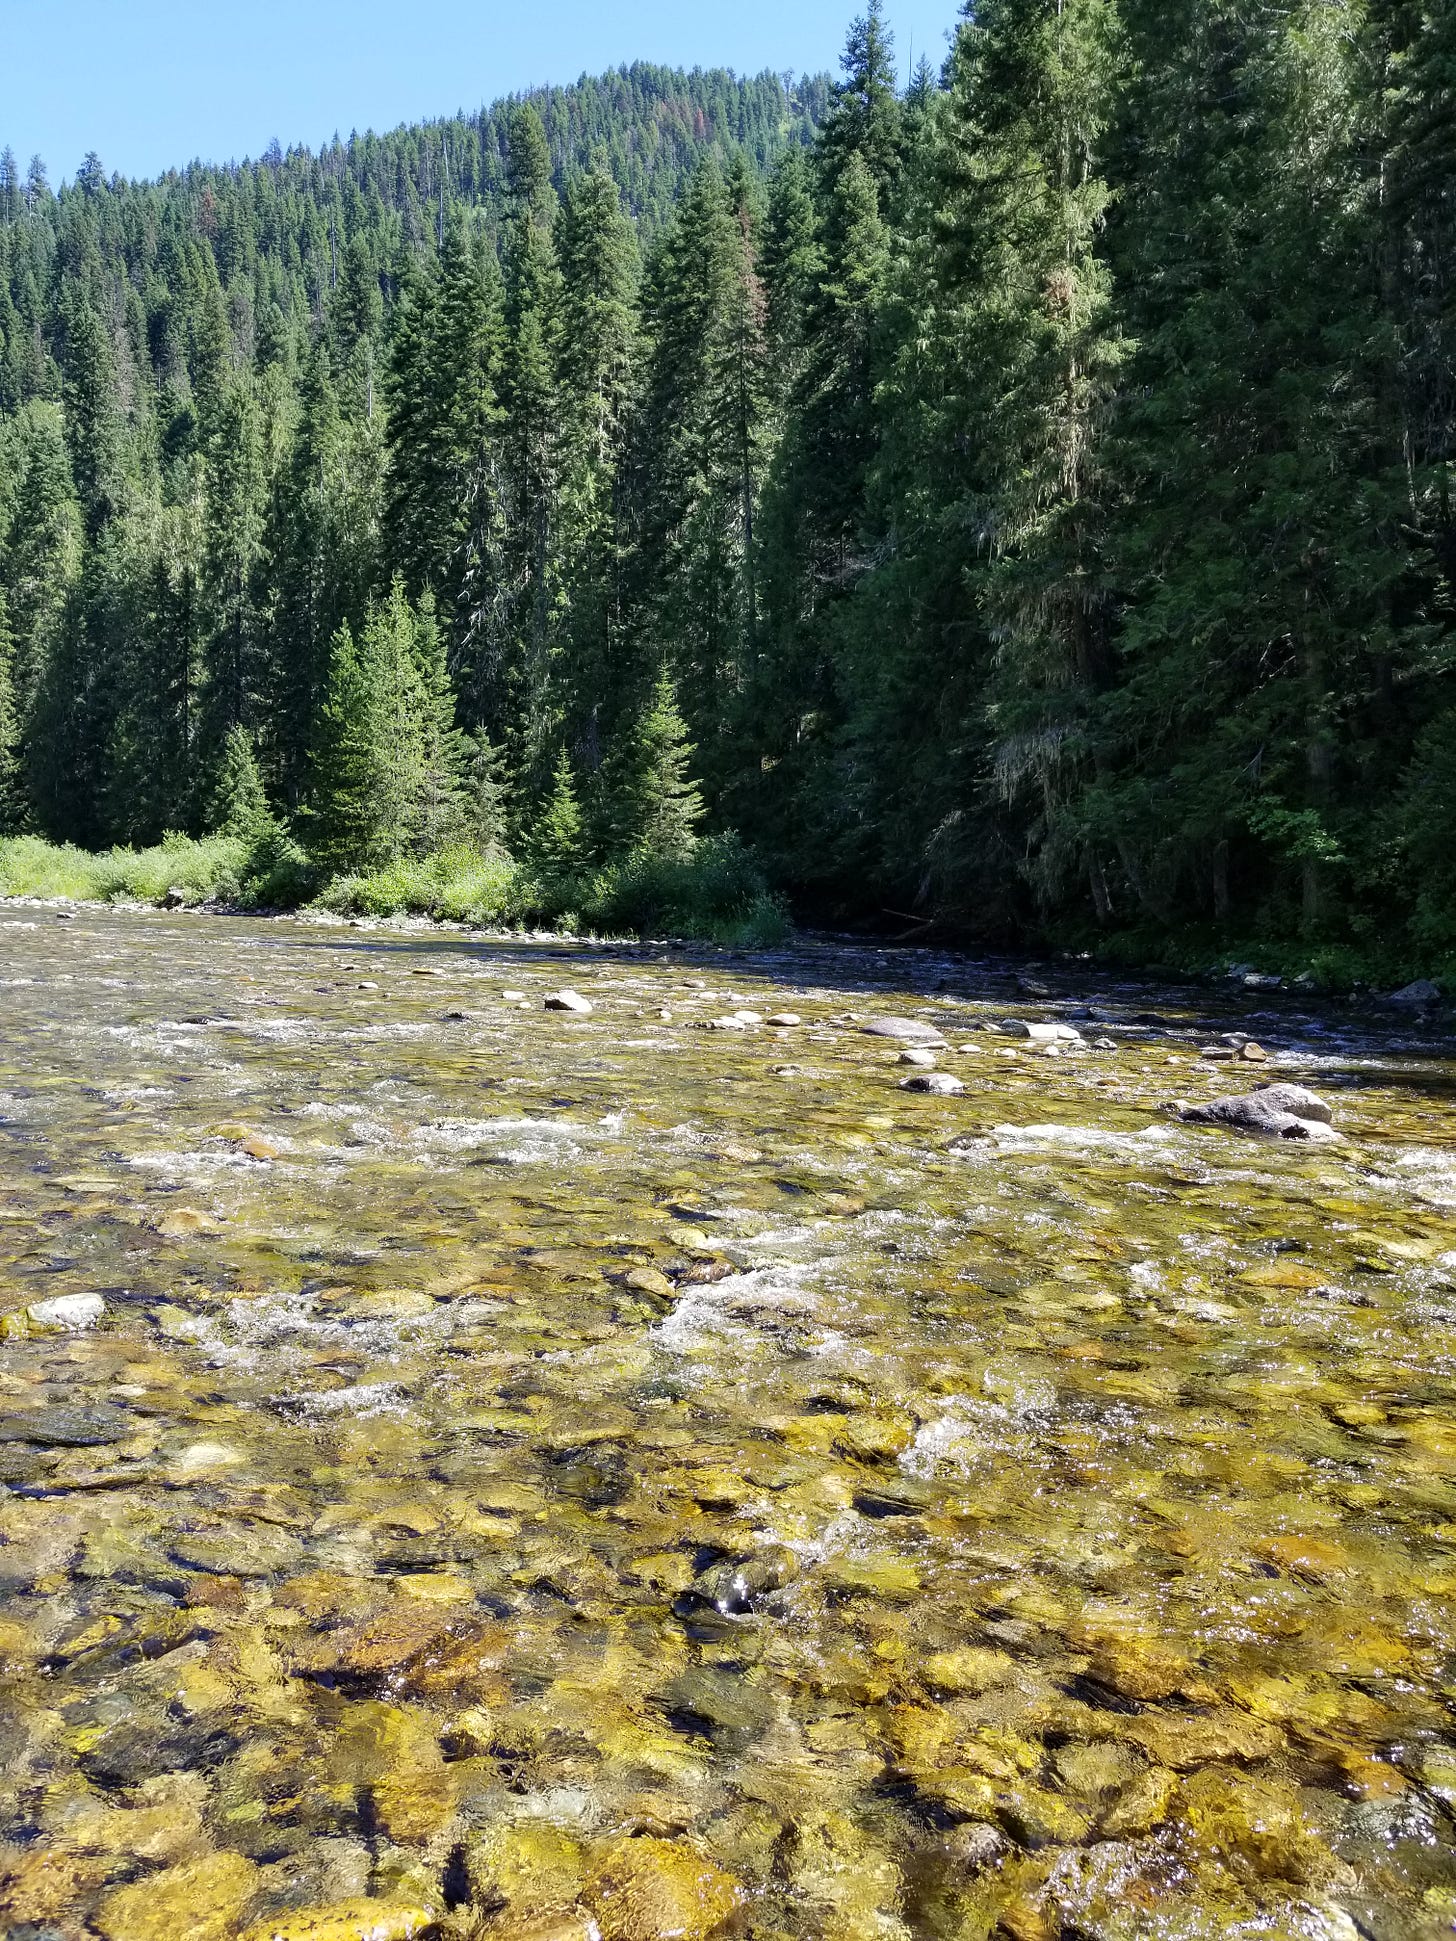 forested mountains with clear river running